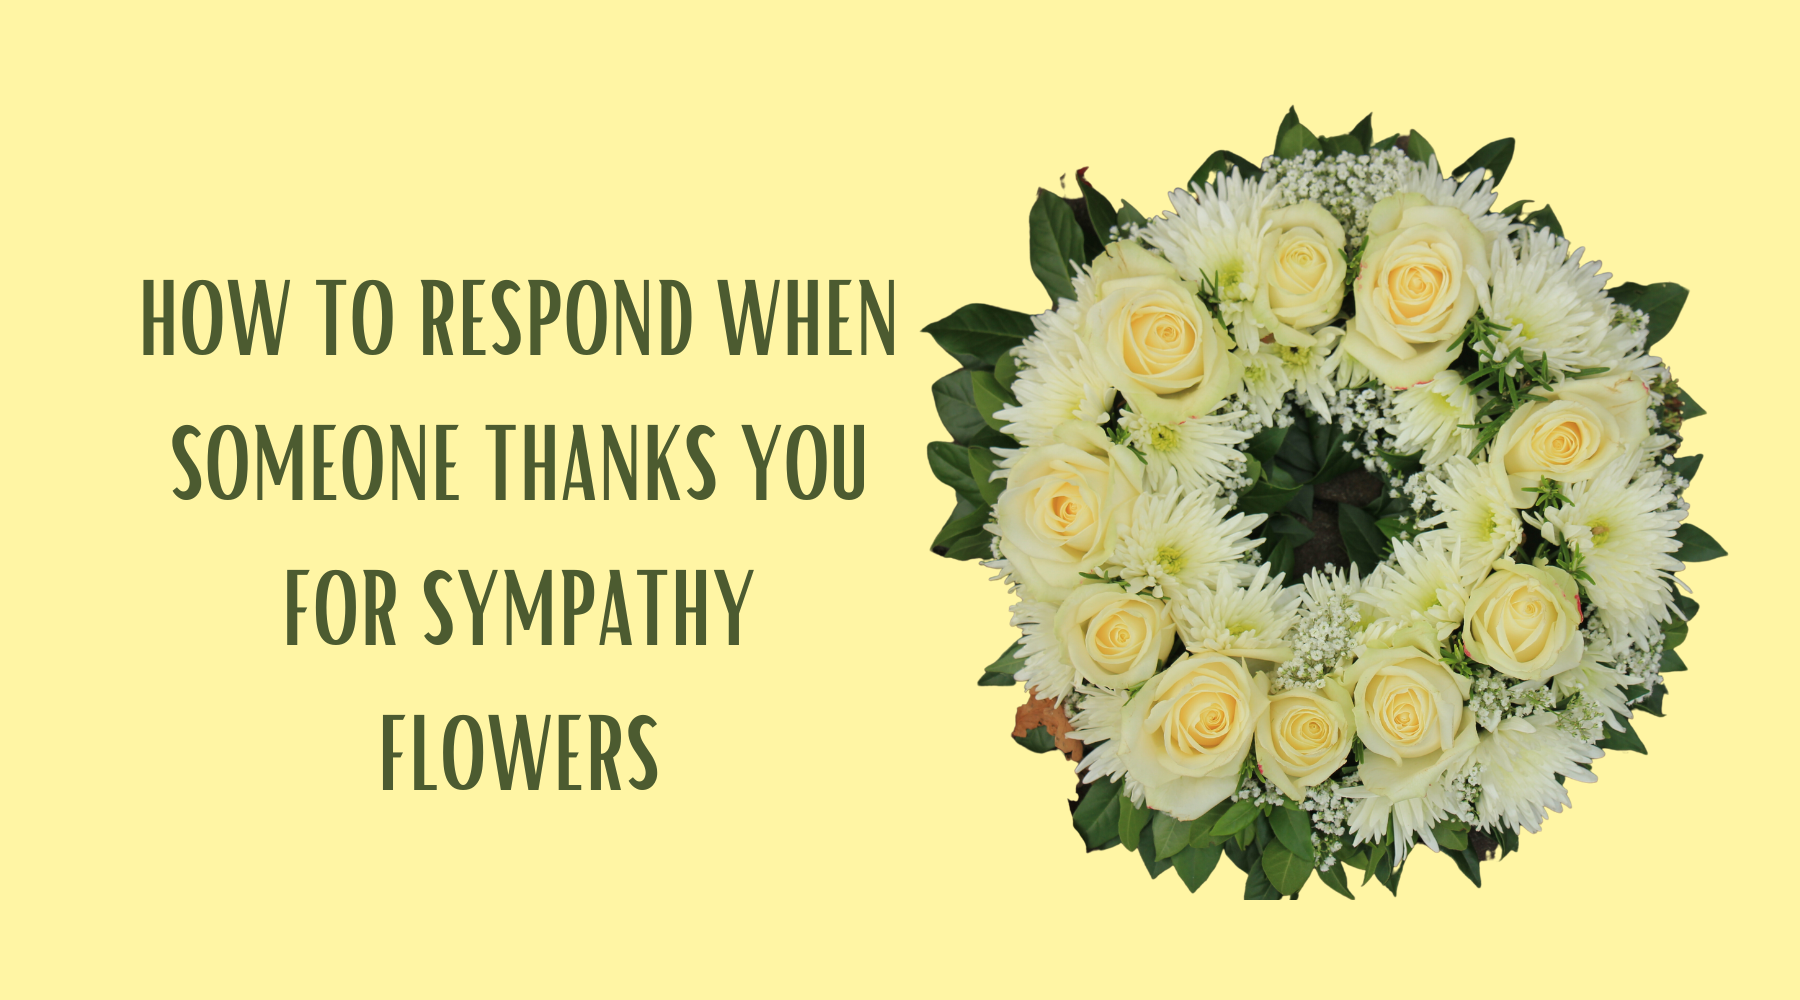 How To Respond When Someone Thanks You For Sympathy Flowers